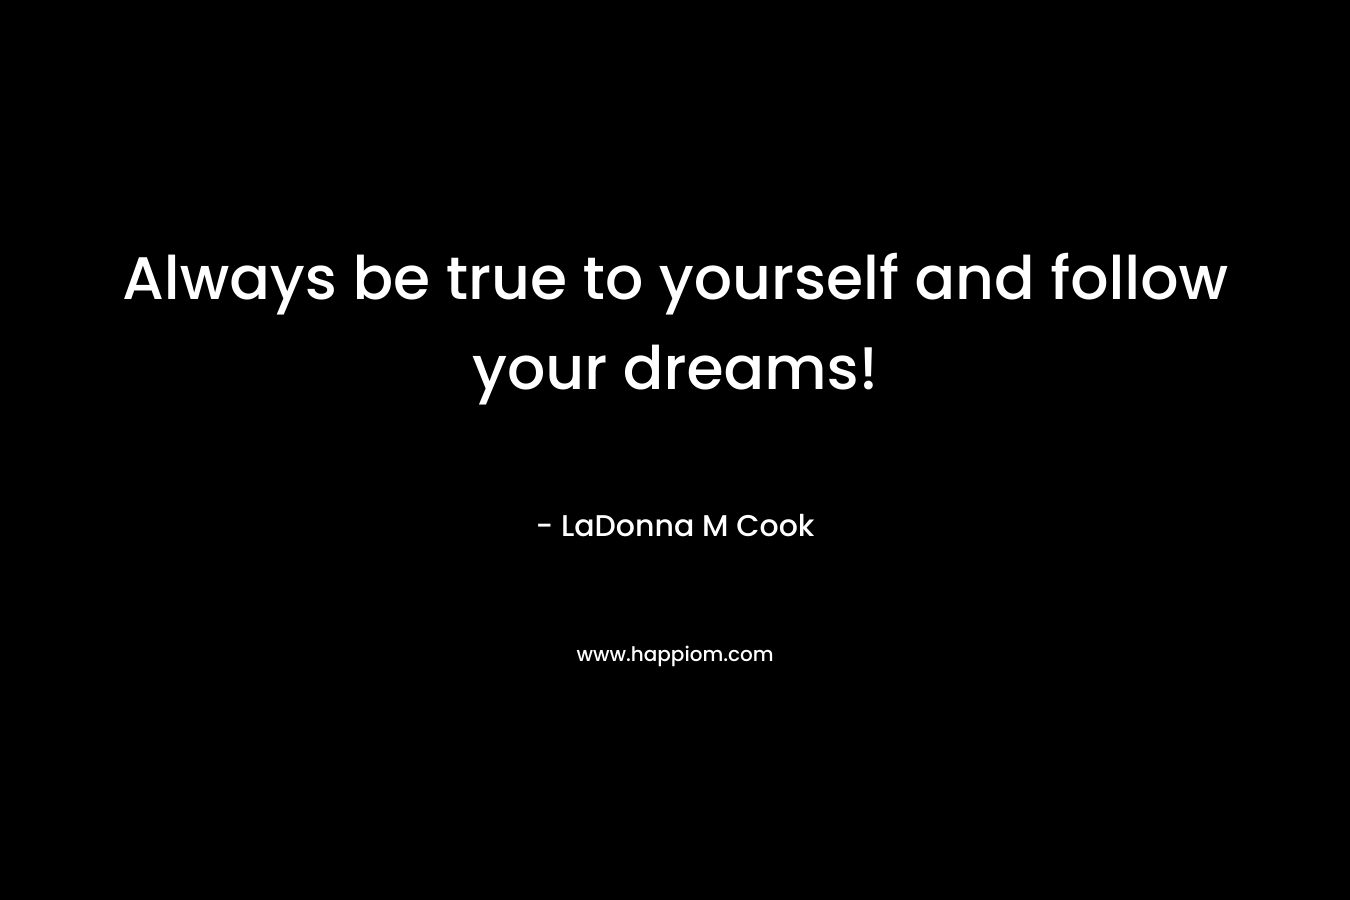 Always be true to yourself and follow your dreams!